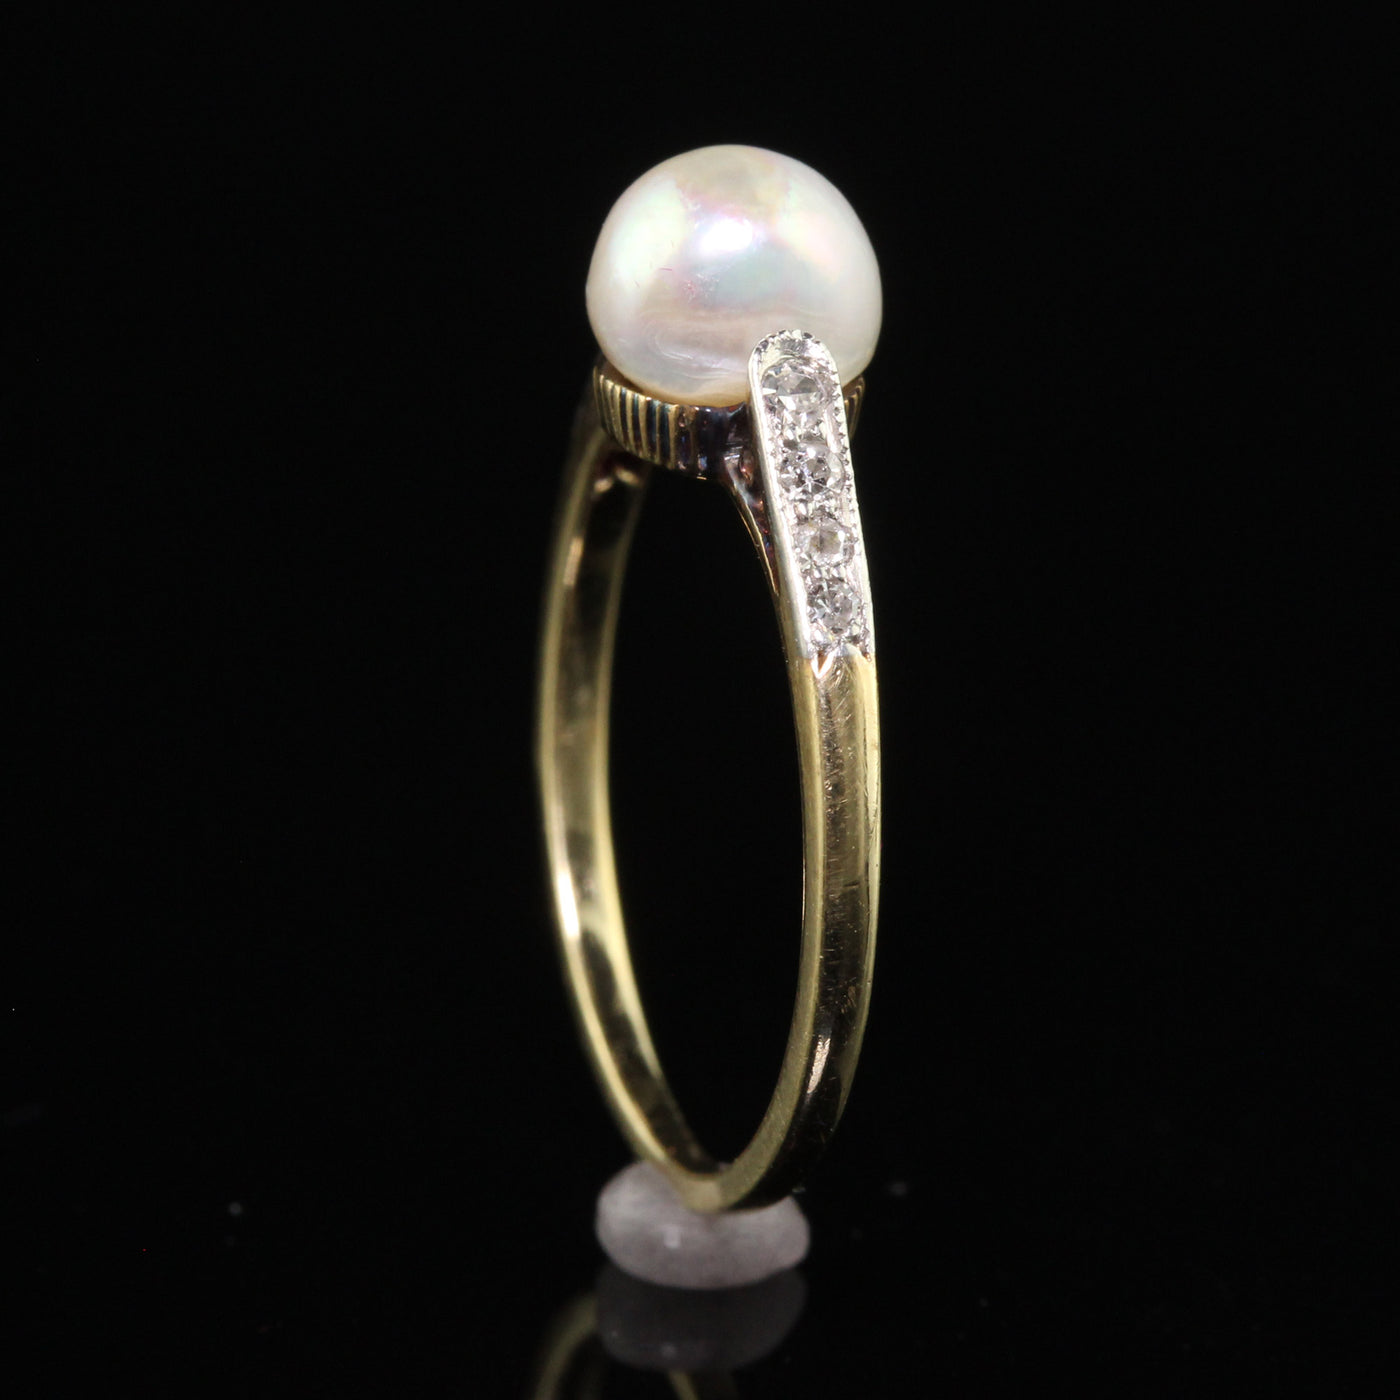 Antique Edwardian 14K Yellow Gold Diamond and Natural Pearl Engagement Ring